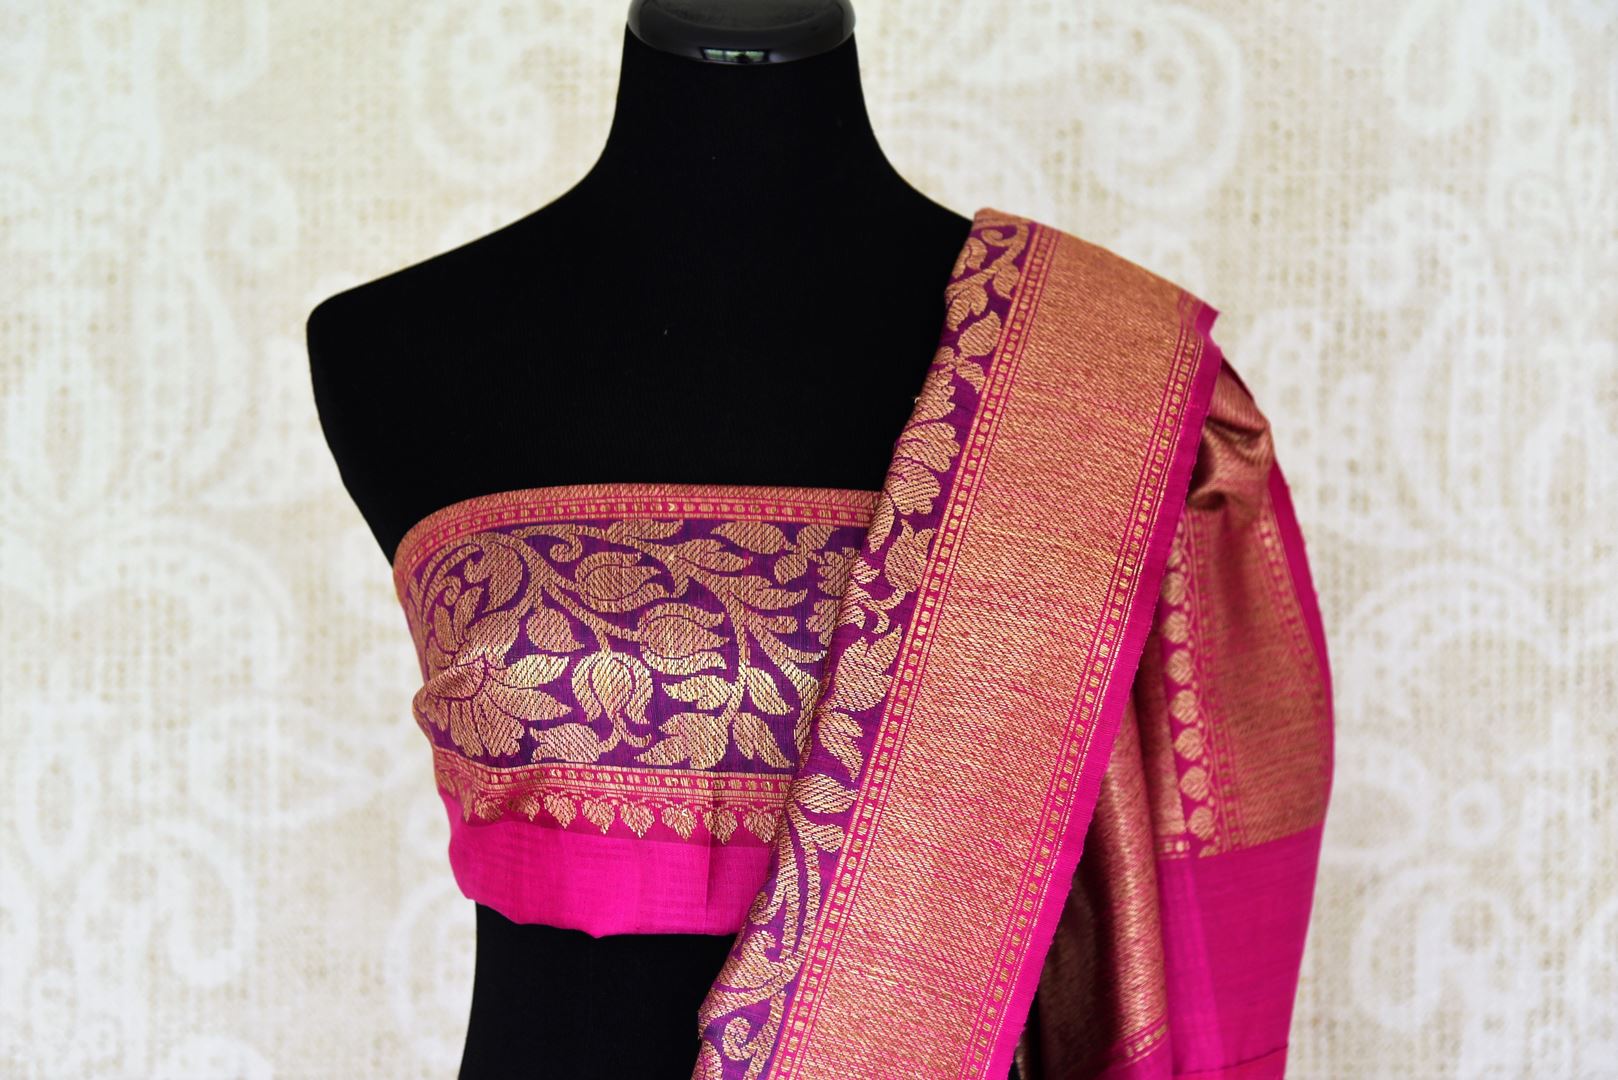 Shop orange pink tussar Banarasi sari with zari border online in USA. If you are heading to an Indian wedding and all you want is a rich traditional style then look no further than Pure Elegance Indian fashion store in USA. We have an exclusive range of Indian designer saris, traditional Banarasi sarees, silk saris and much more.-blouse pallu